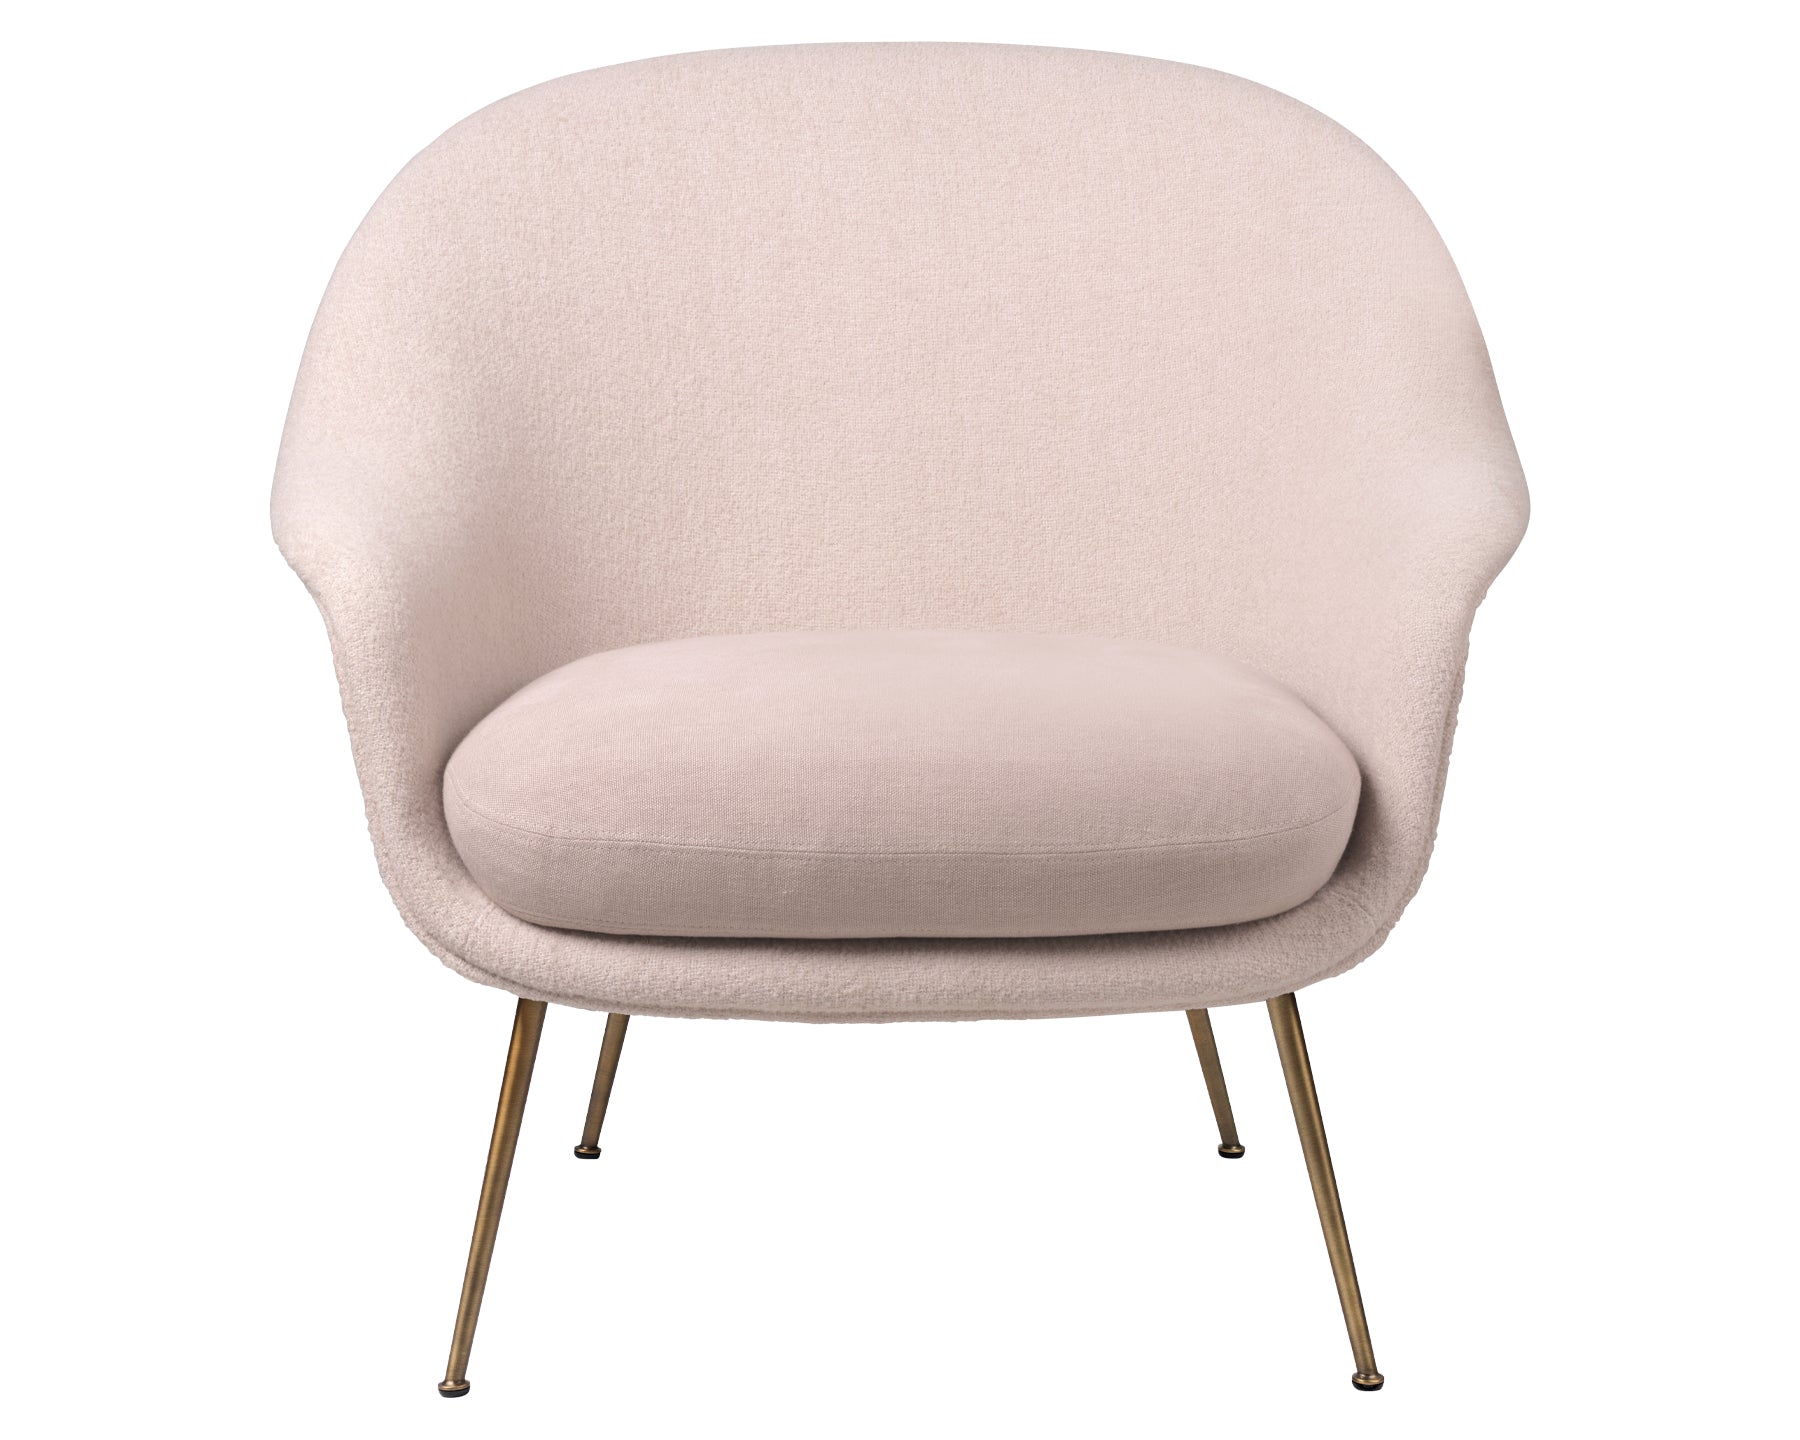 Contemporary Pink Lounge Chair | DSHOP